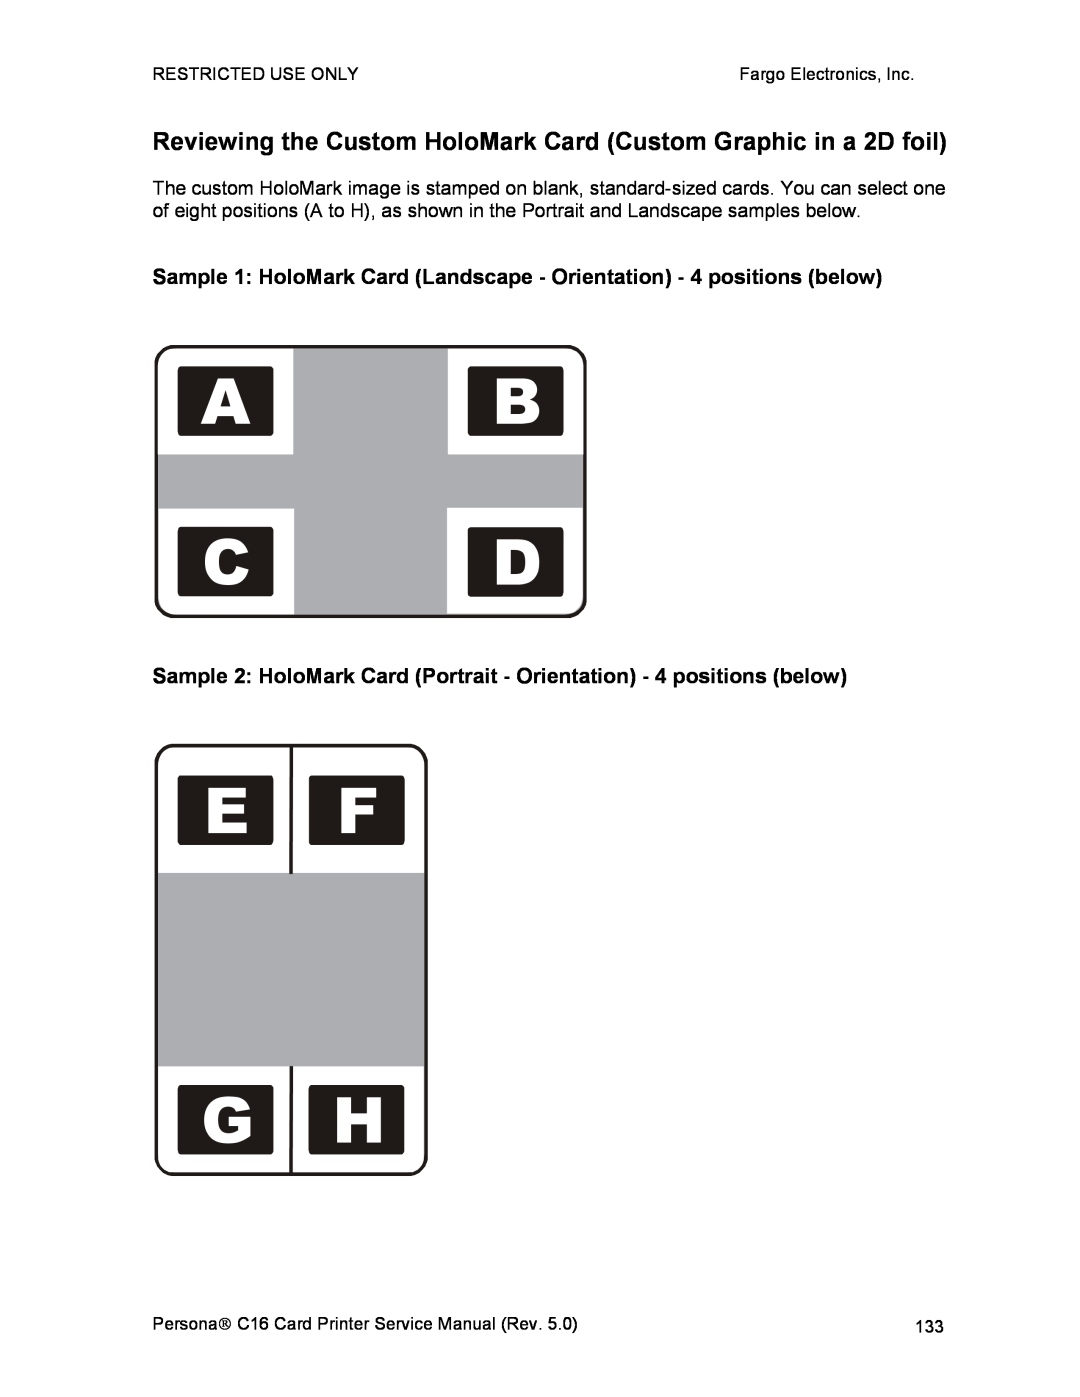 FARGO electronic C16 service manual E F G H, Reviewing the Custom HoloMark Card Custom Graphic in a 2D foil, A B C D 